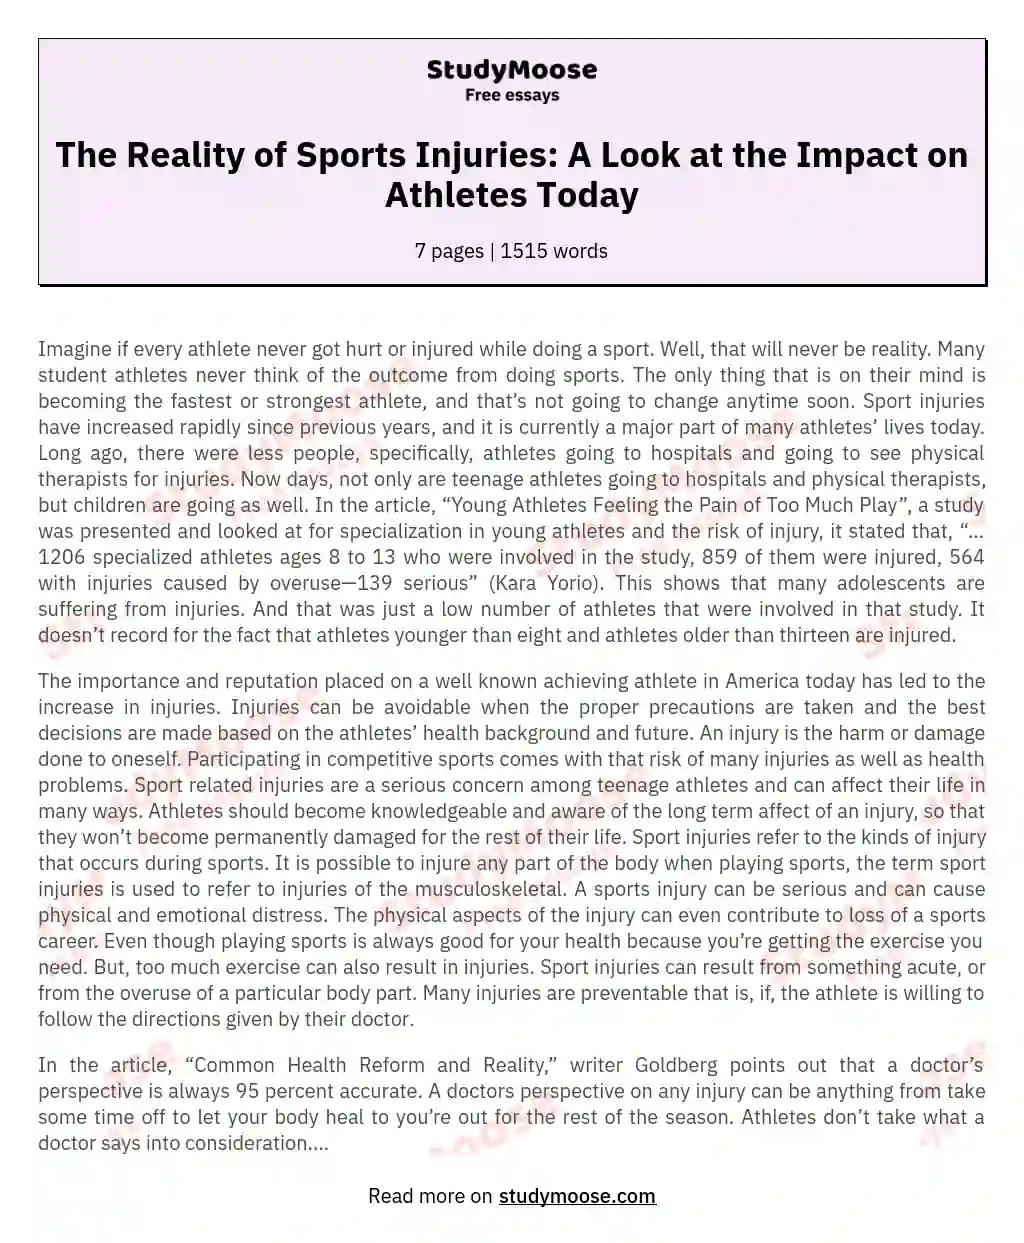 The Reality of Sports Injuries: A Look at the Impact on Athletes Today essay